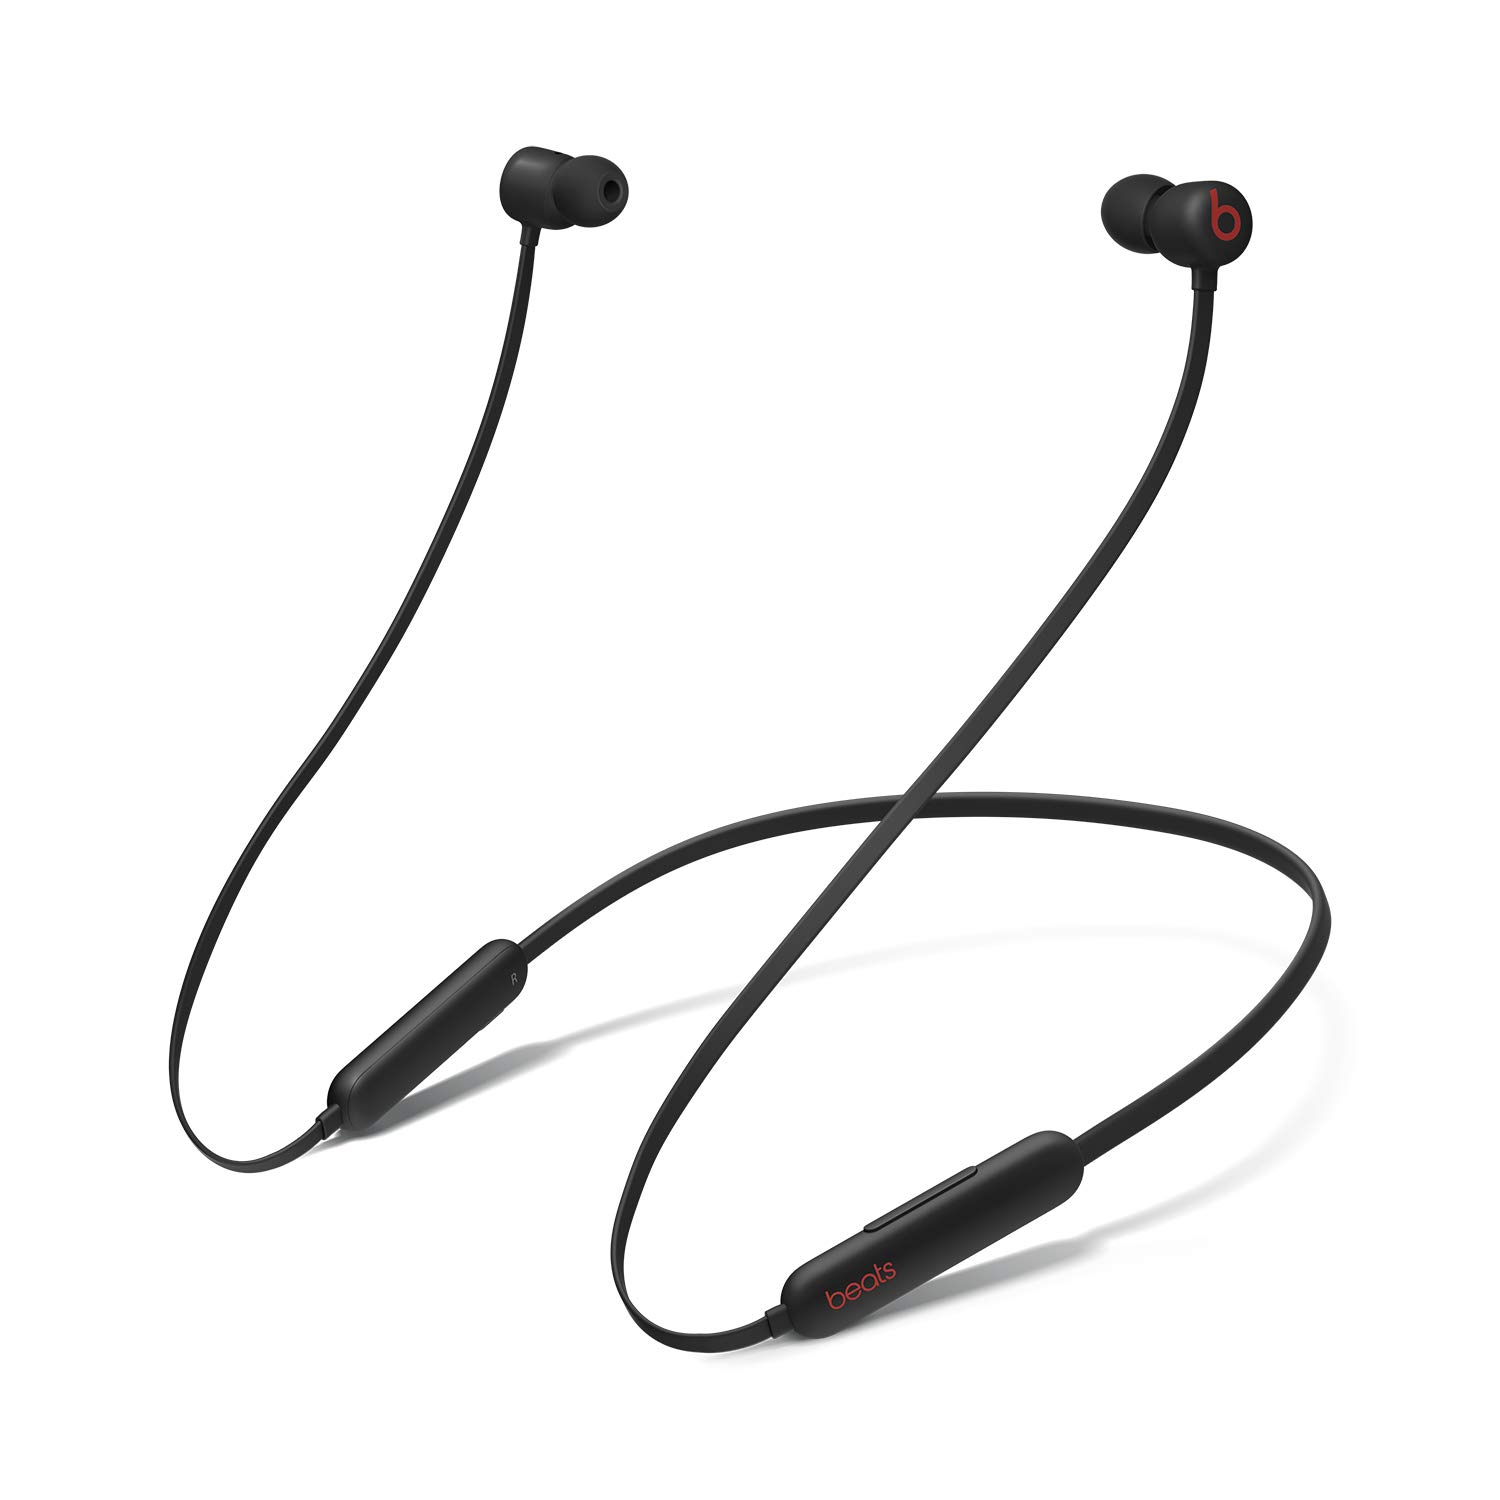 Beats Flex Wireless Earbuds -  W1 Headphone Chip, Magnetic Earphones, Class 1 Bluetooth, 12 Hours of Listening Time, Built-in Microphone -  Black